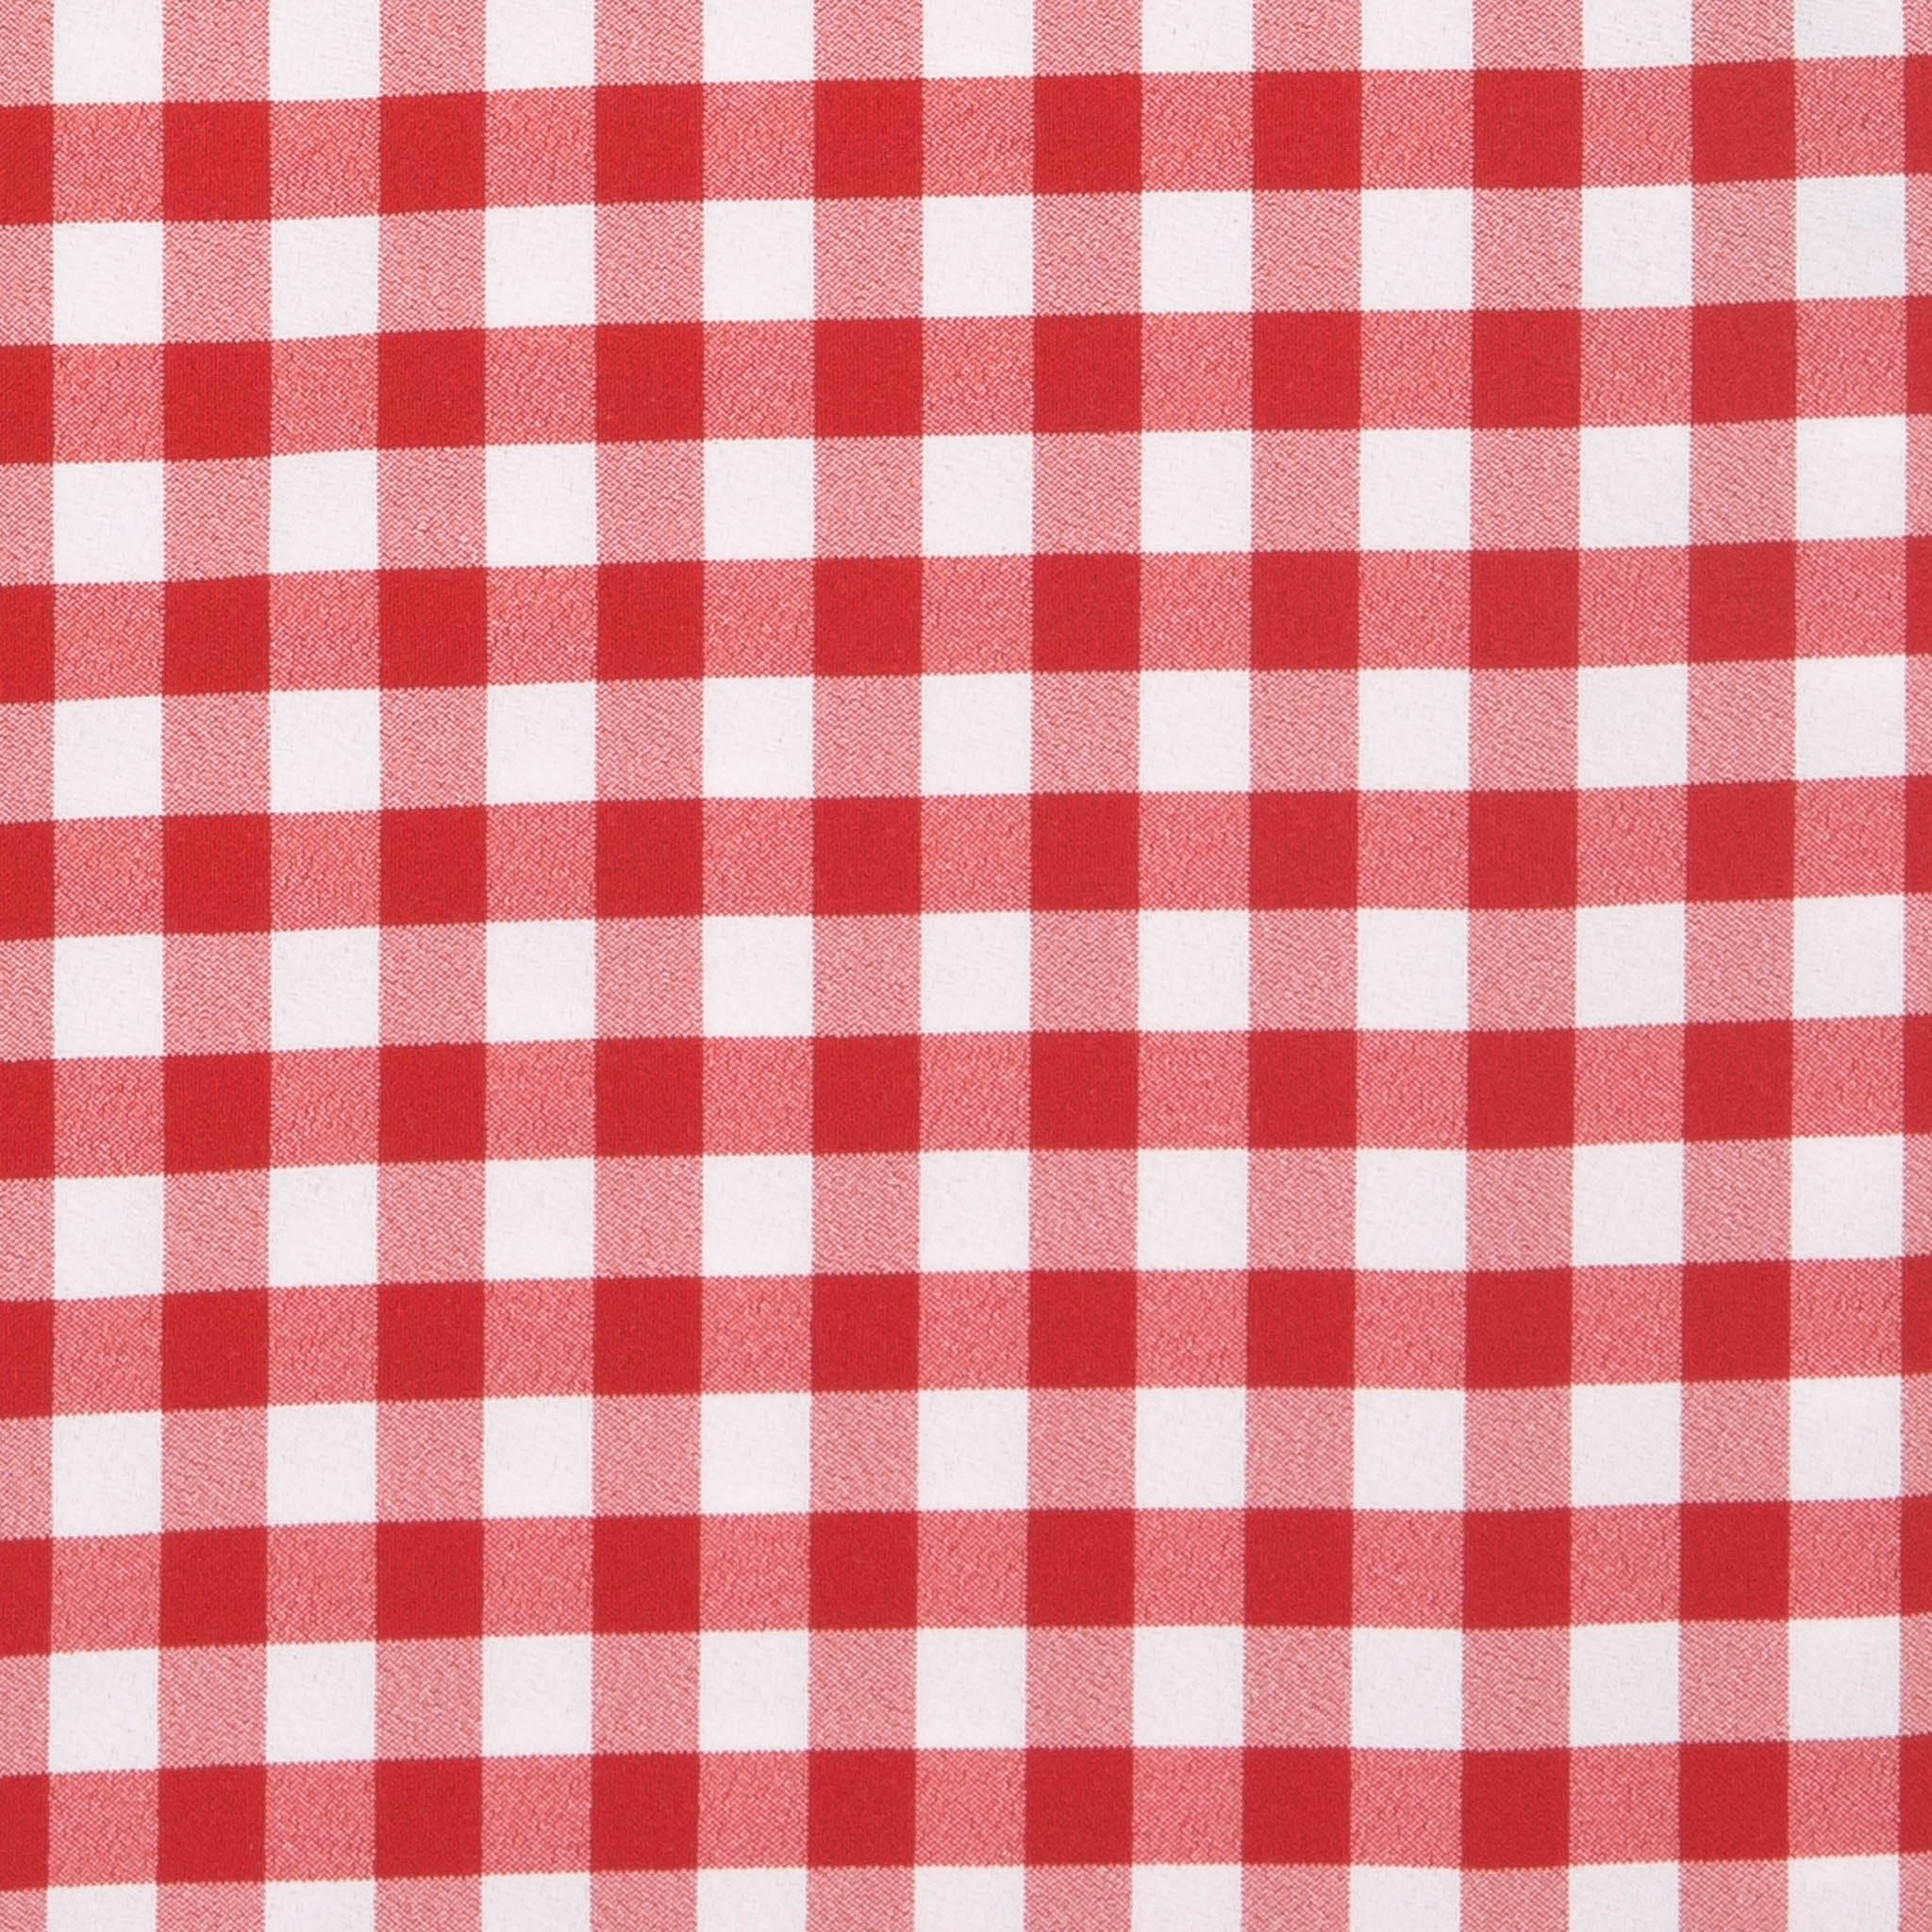 Red Check